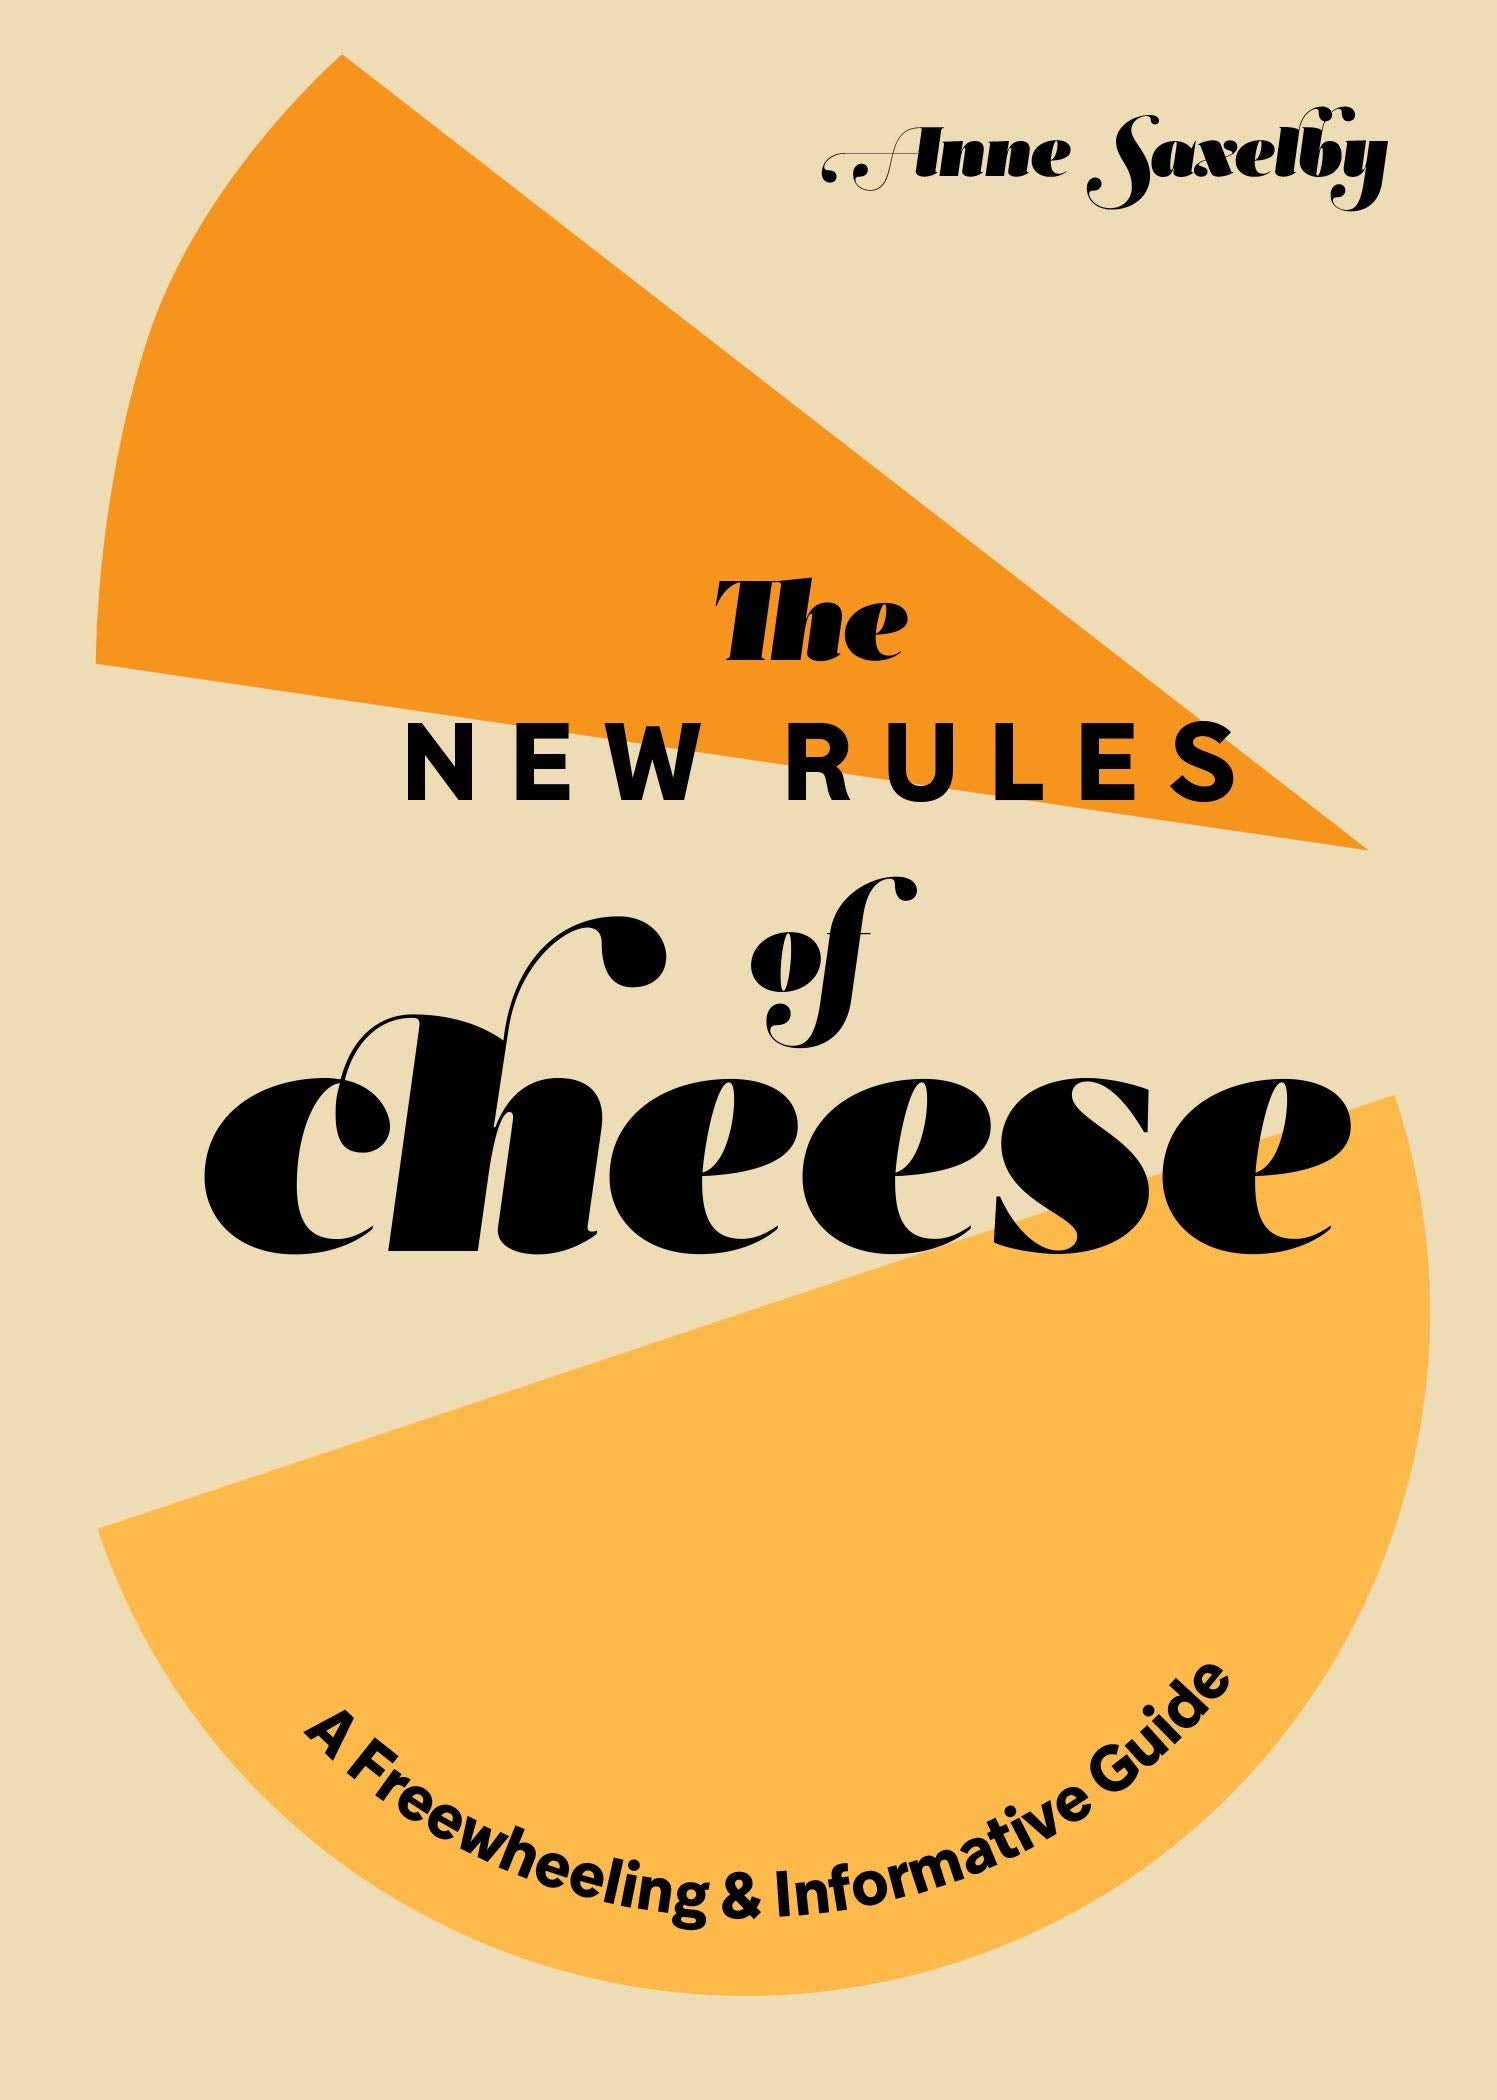 The New Rules of Cheese: A Freewheeling & Informative Guide (Anne Saxelby)